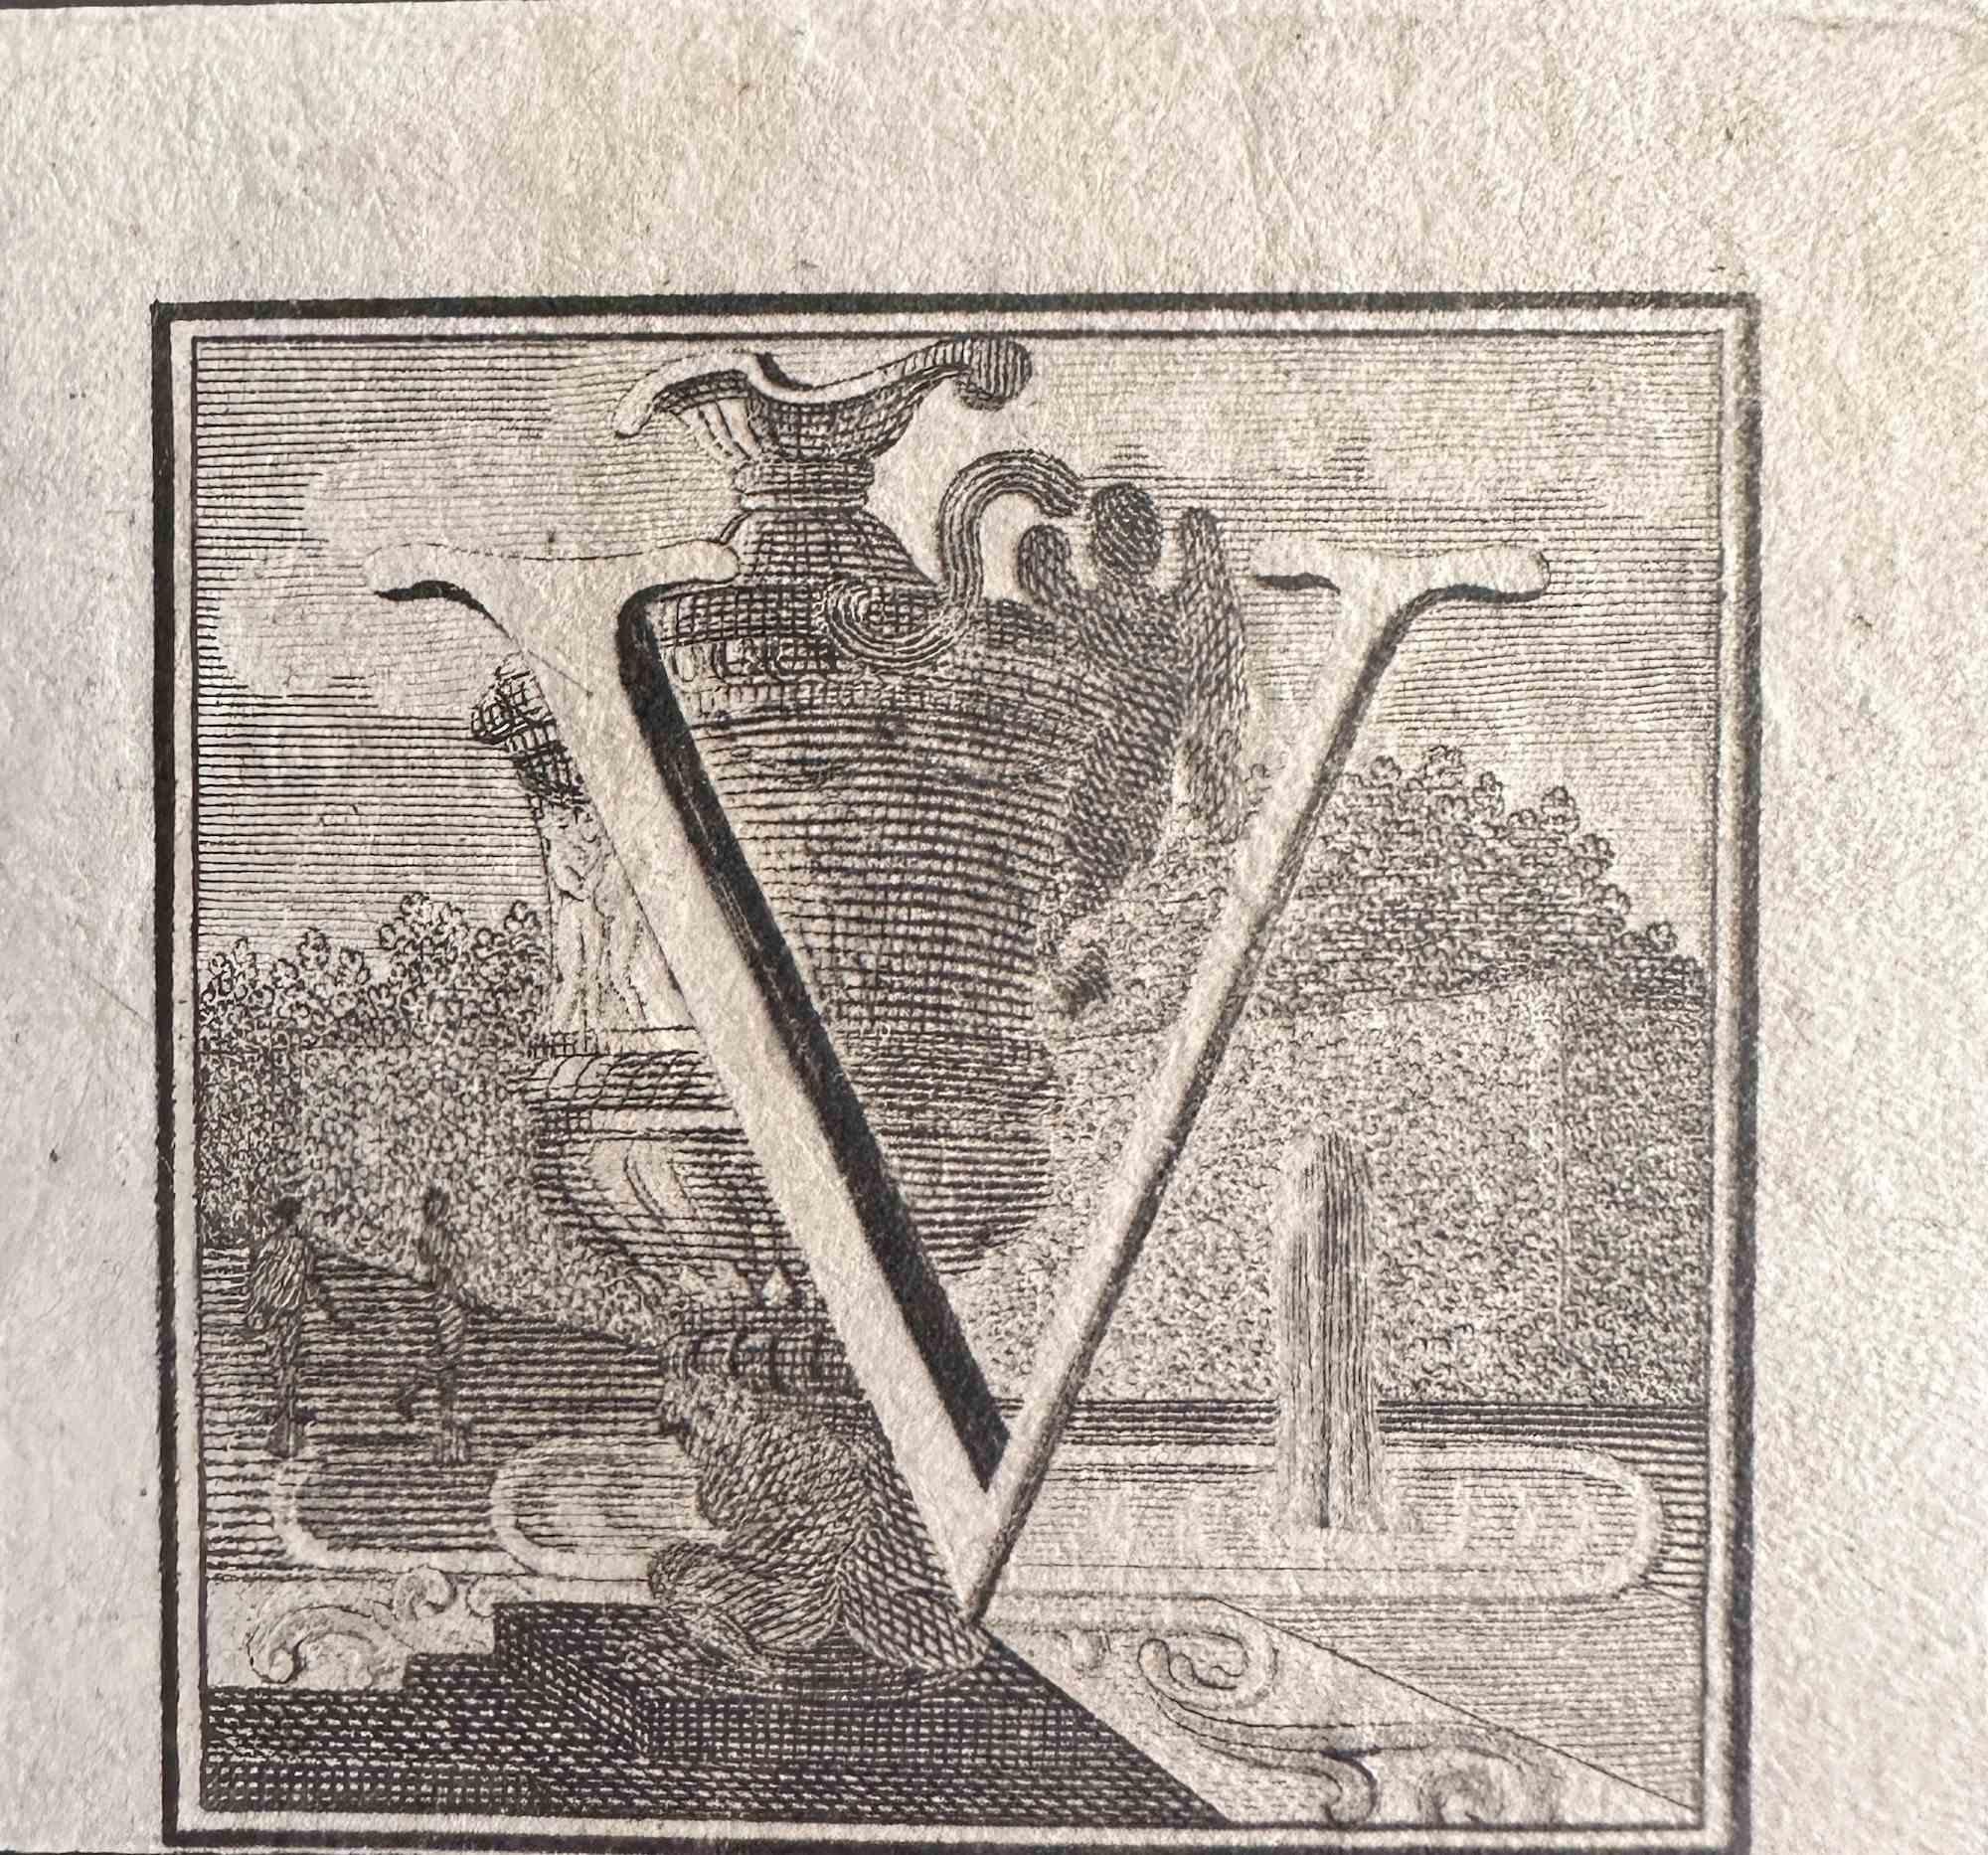 Letter V is an etching realized by Luigi Vanvitelli artist of the 18th century.

Good condtions.

The etching belongs to the print suite “Antiquities of Herculaneum Exposed” (original title: “Le Antichità di Ercolano Esposte”), an eight-volume